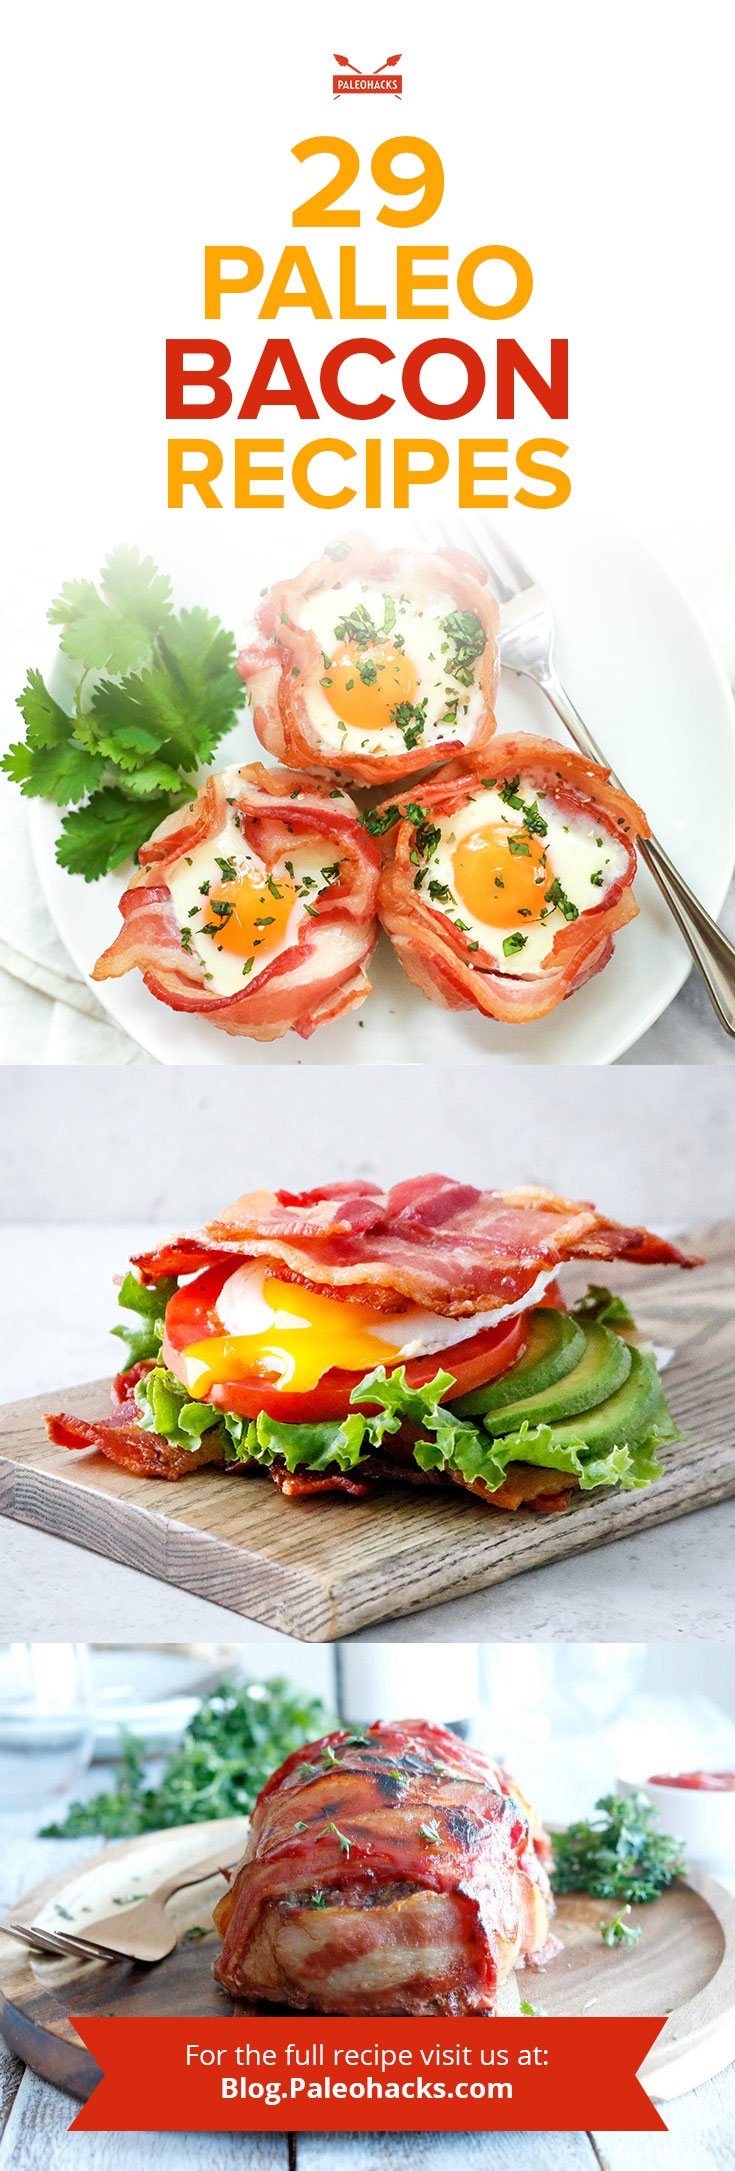 Upgrade your recipes with savory bacon add-ons for breakfast, lunch, dinner, and even dessert!